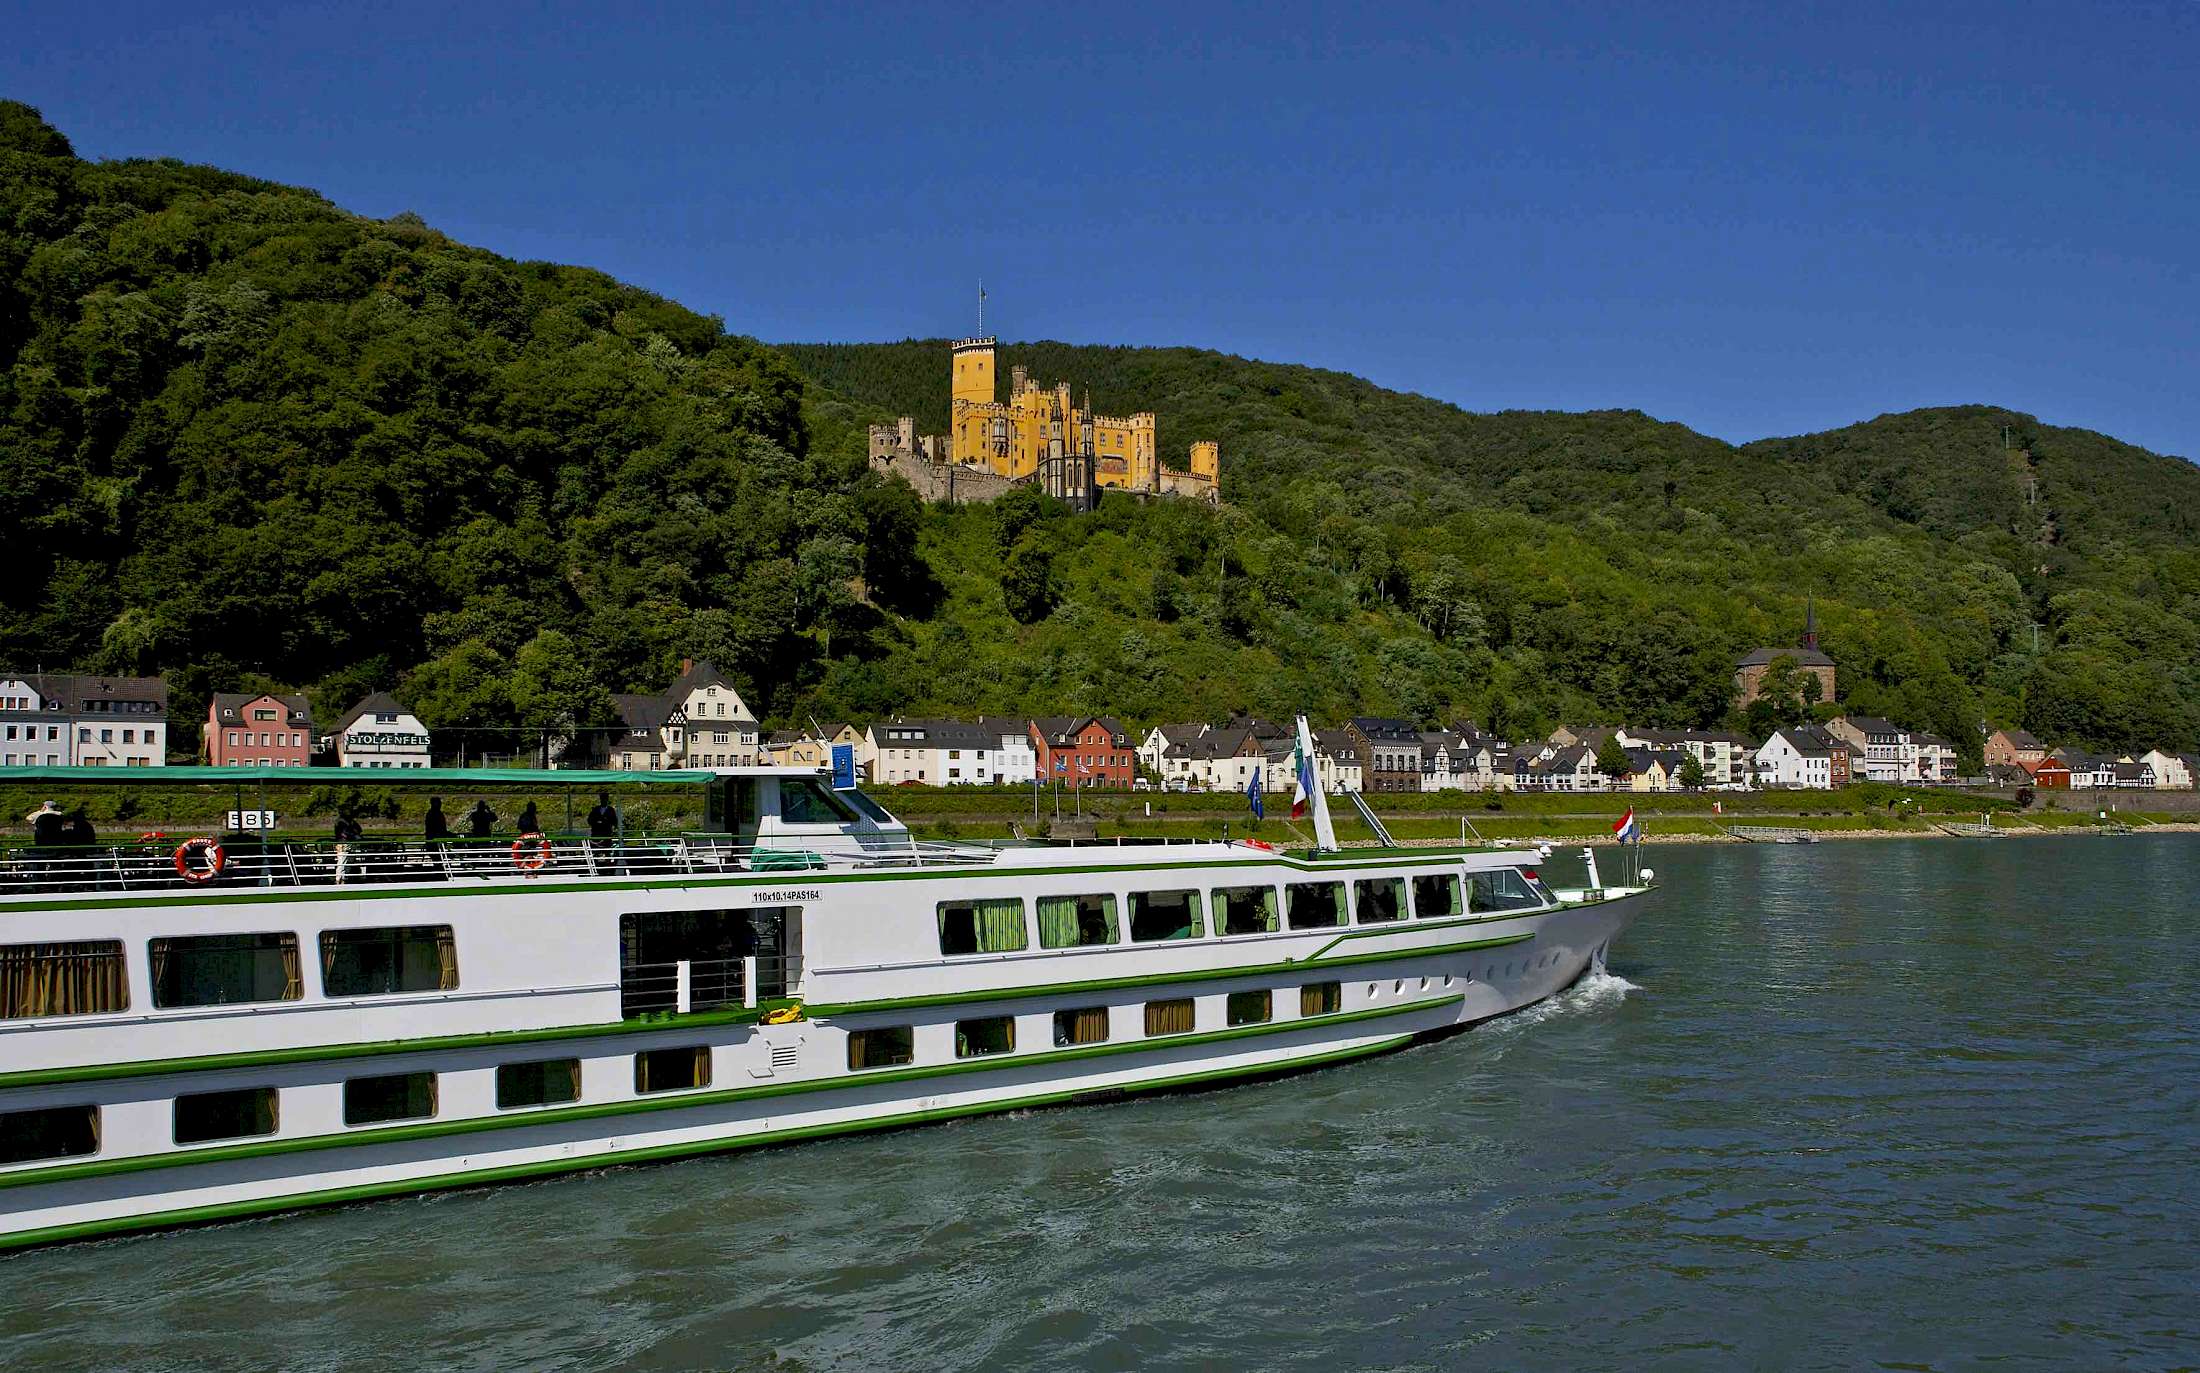 Cruise past timeless villages and castles on the Rhine.